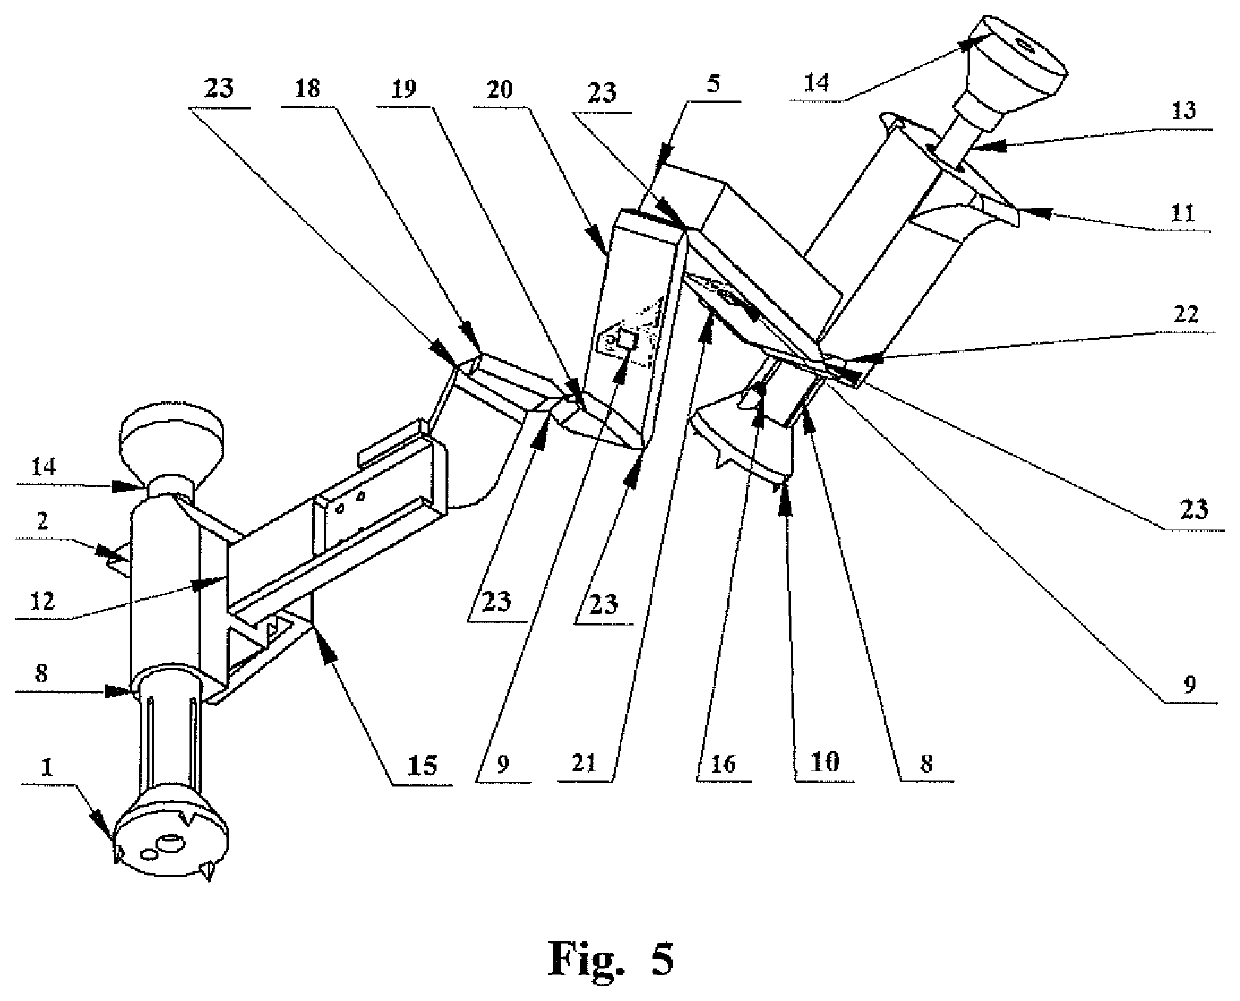 Device for measuring femur displacement and method of making orthopedic measurements during a surgical procedure to correct a damaged hip